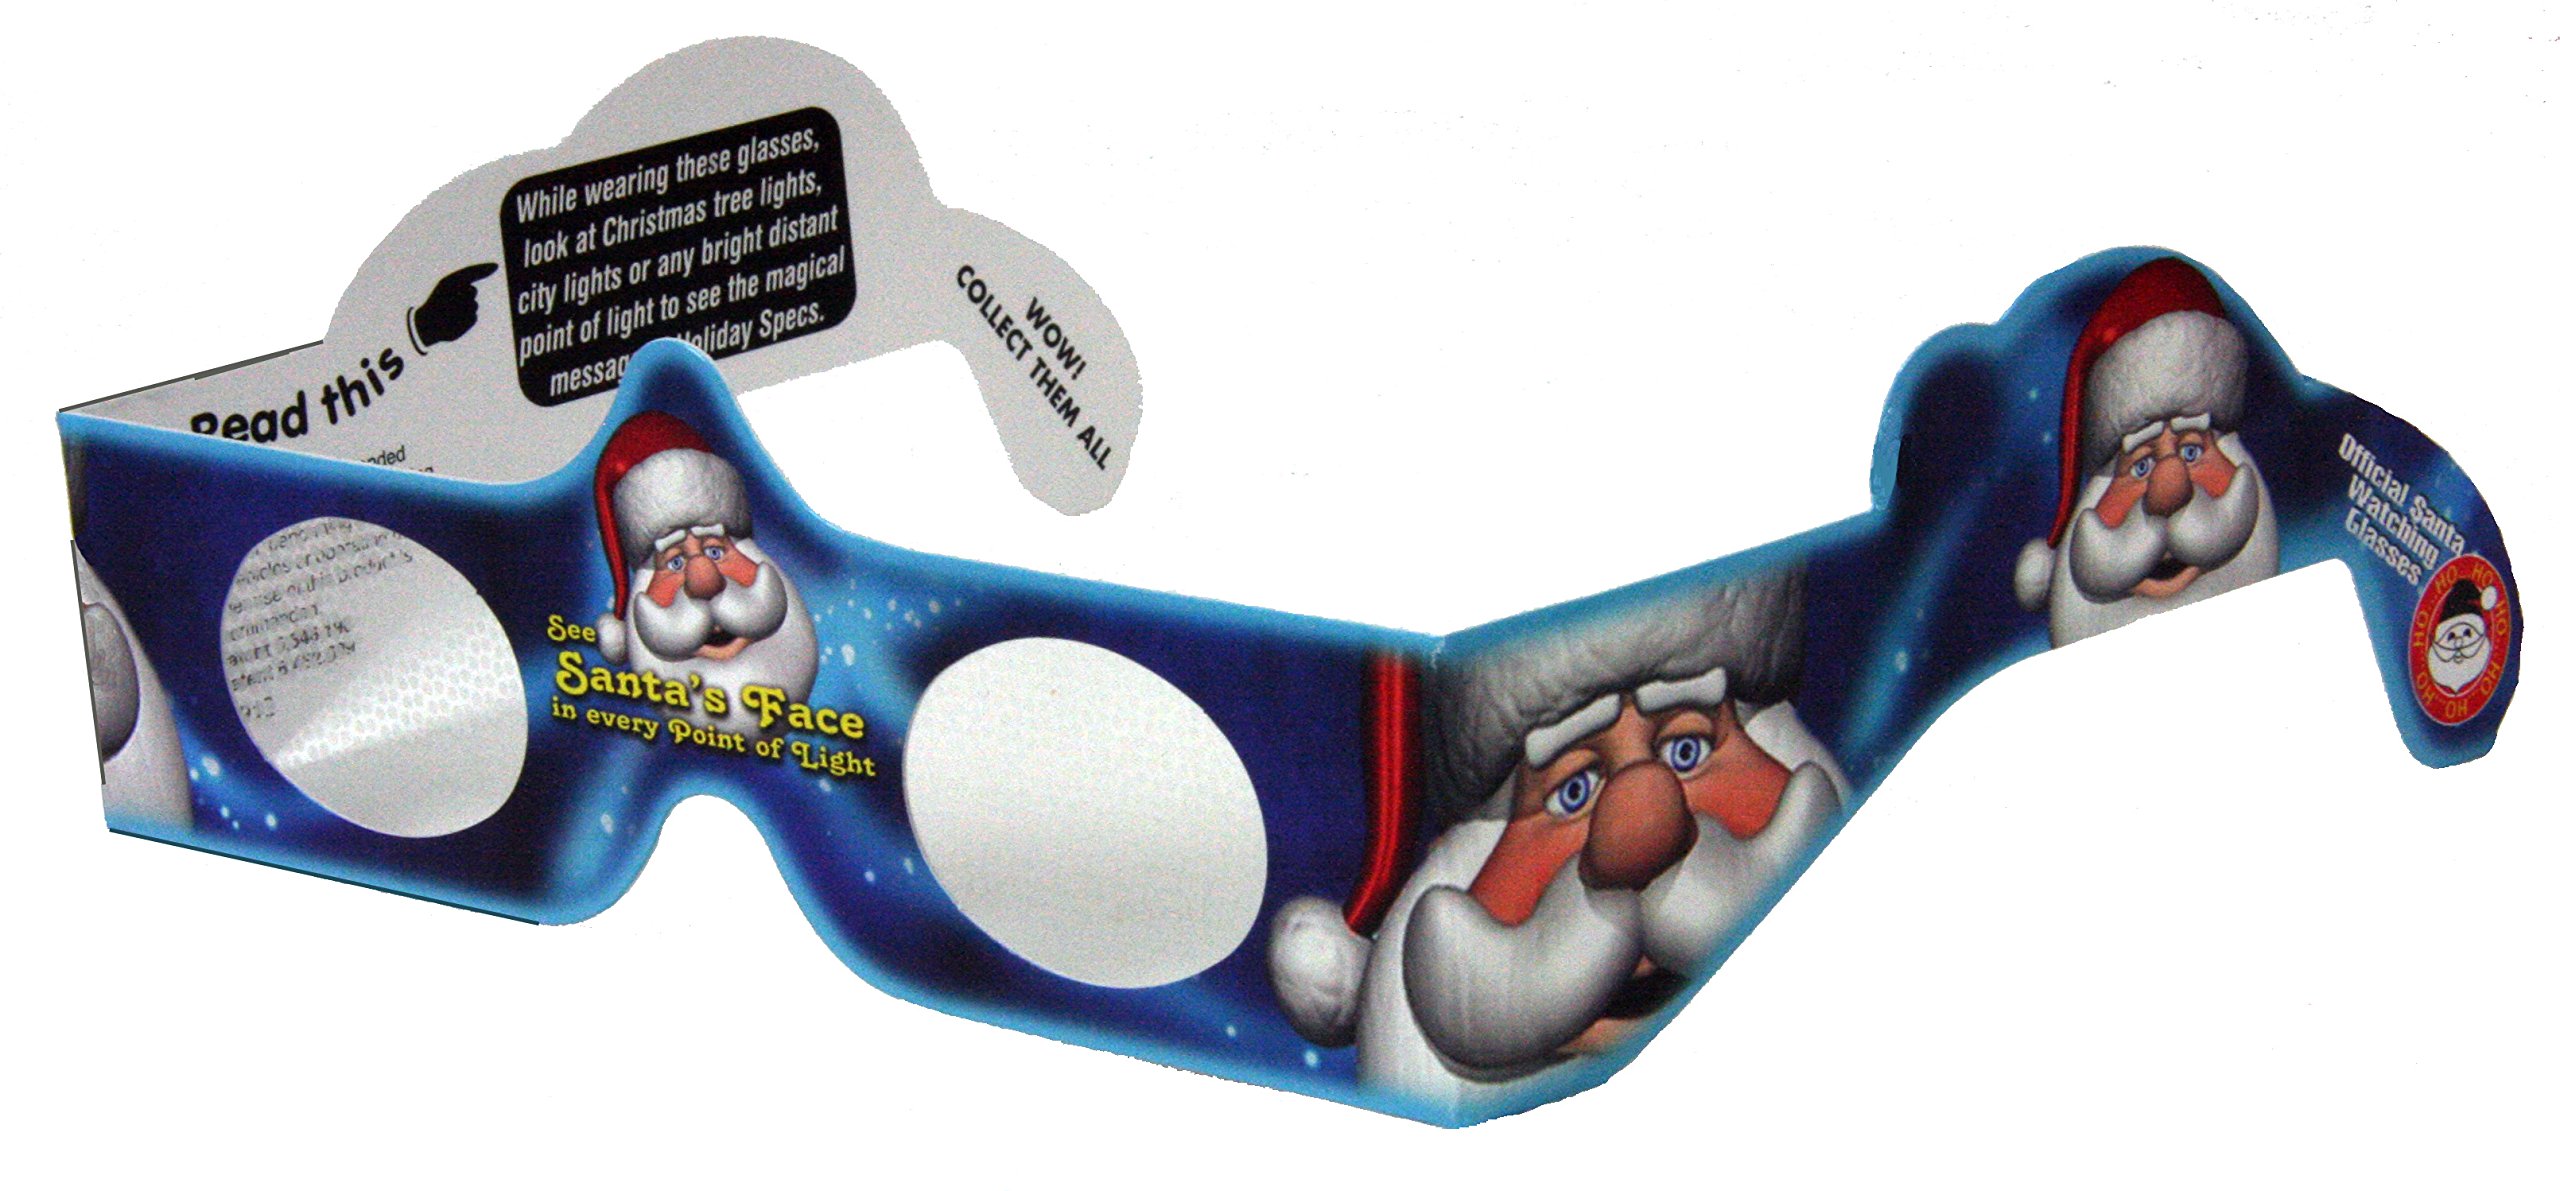 3D Christmas Glasses - 10 Pack Holiday Specs - Hologram Holiday Images